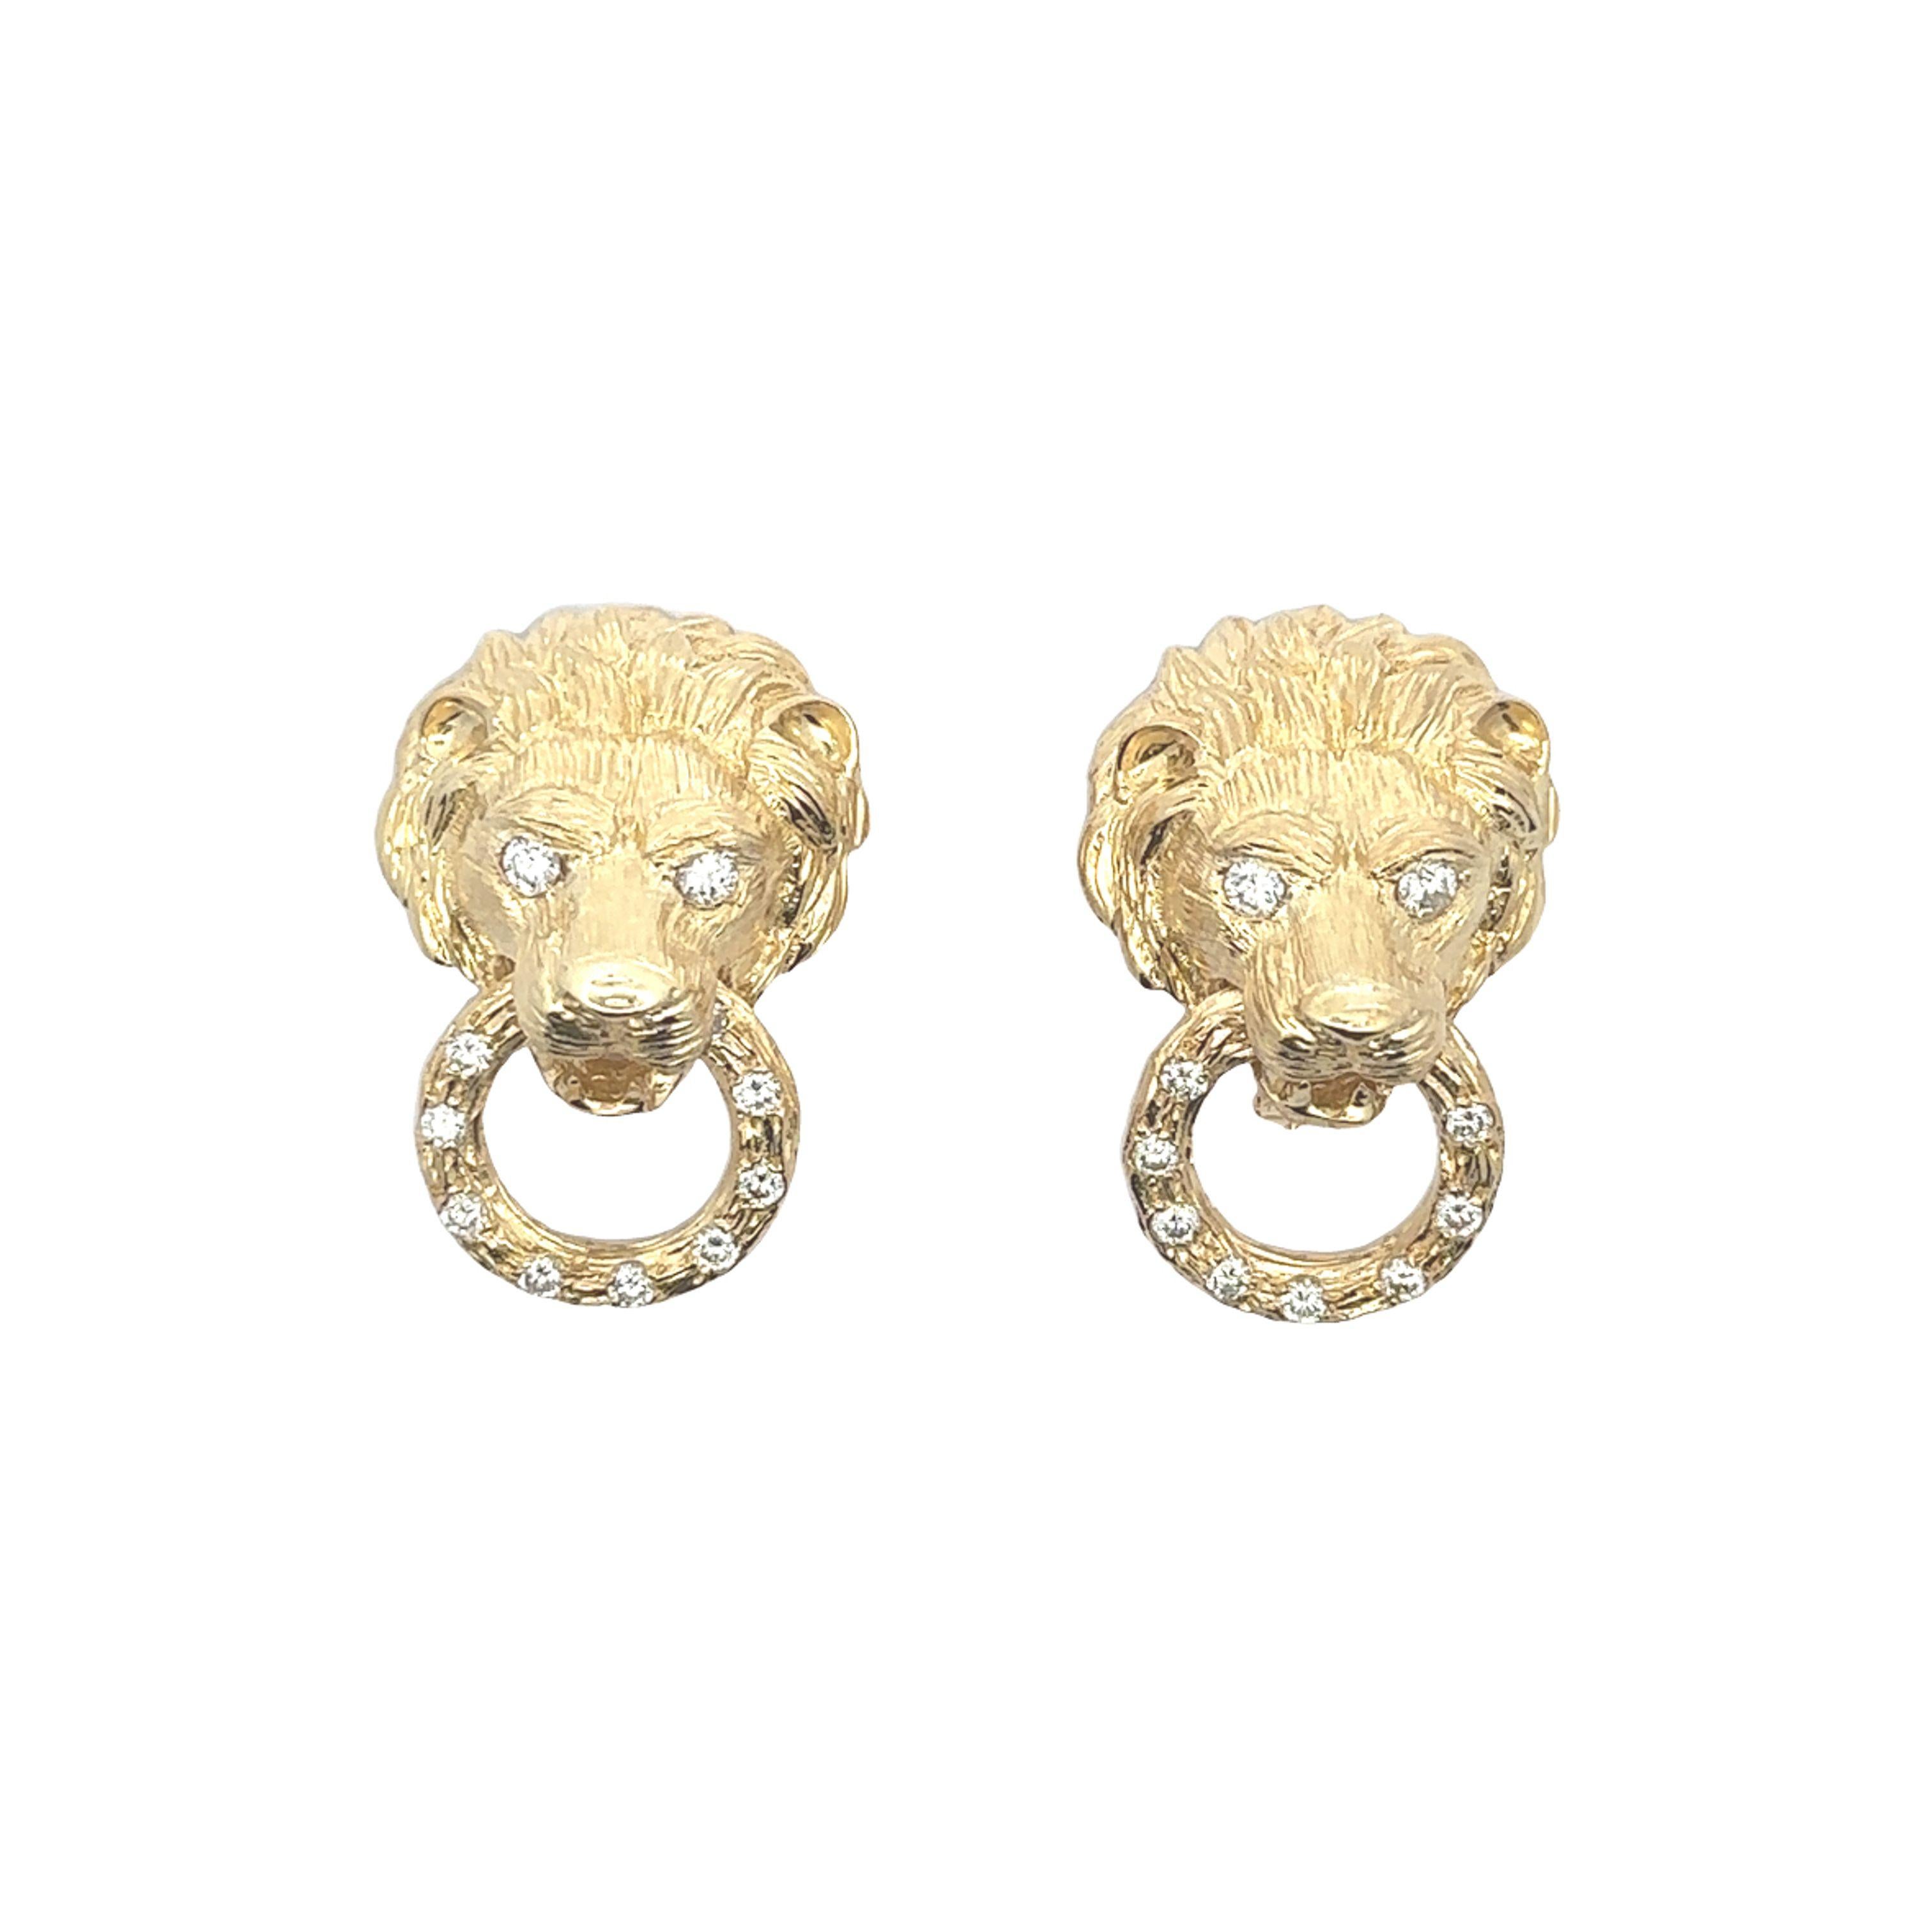 Dive into the glamorous vibes of the 1970s with this ultra-rare Van Cleef & Arpels earrings and brooch set! Picture this: stunning lion door knockers made of 18kt yellow gold and sprinkled with carefully chosen diamonds. They're not just jewelry;